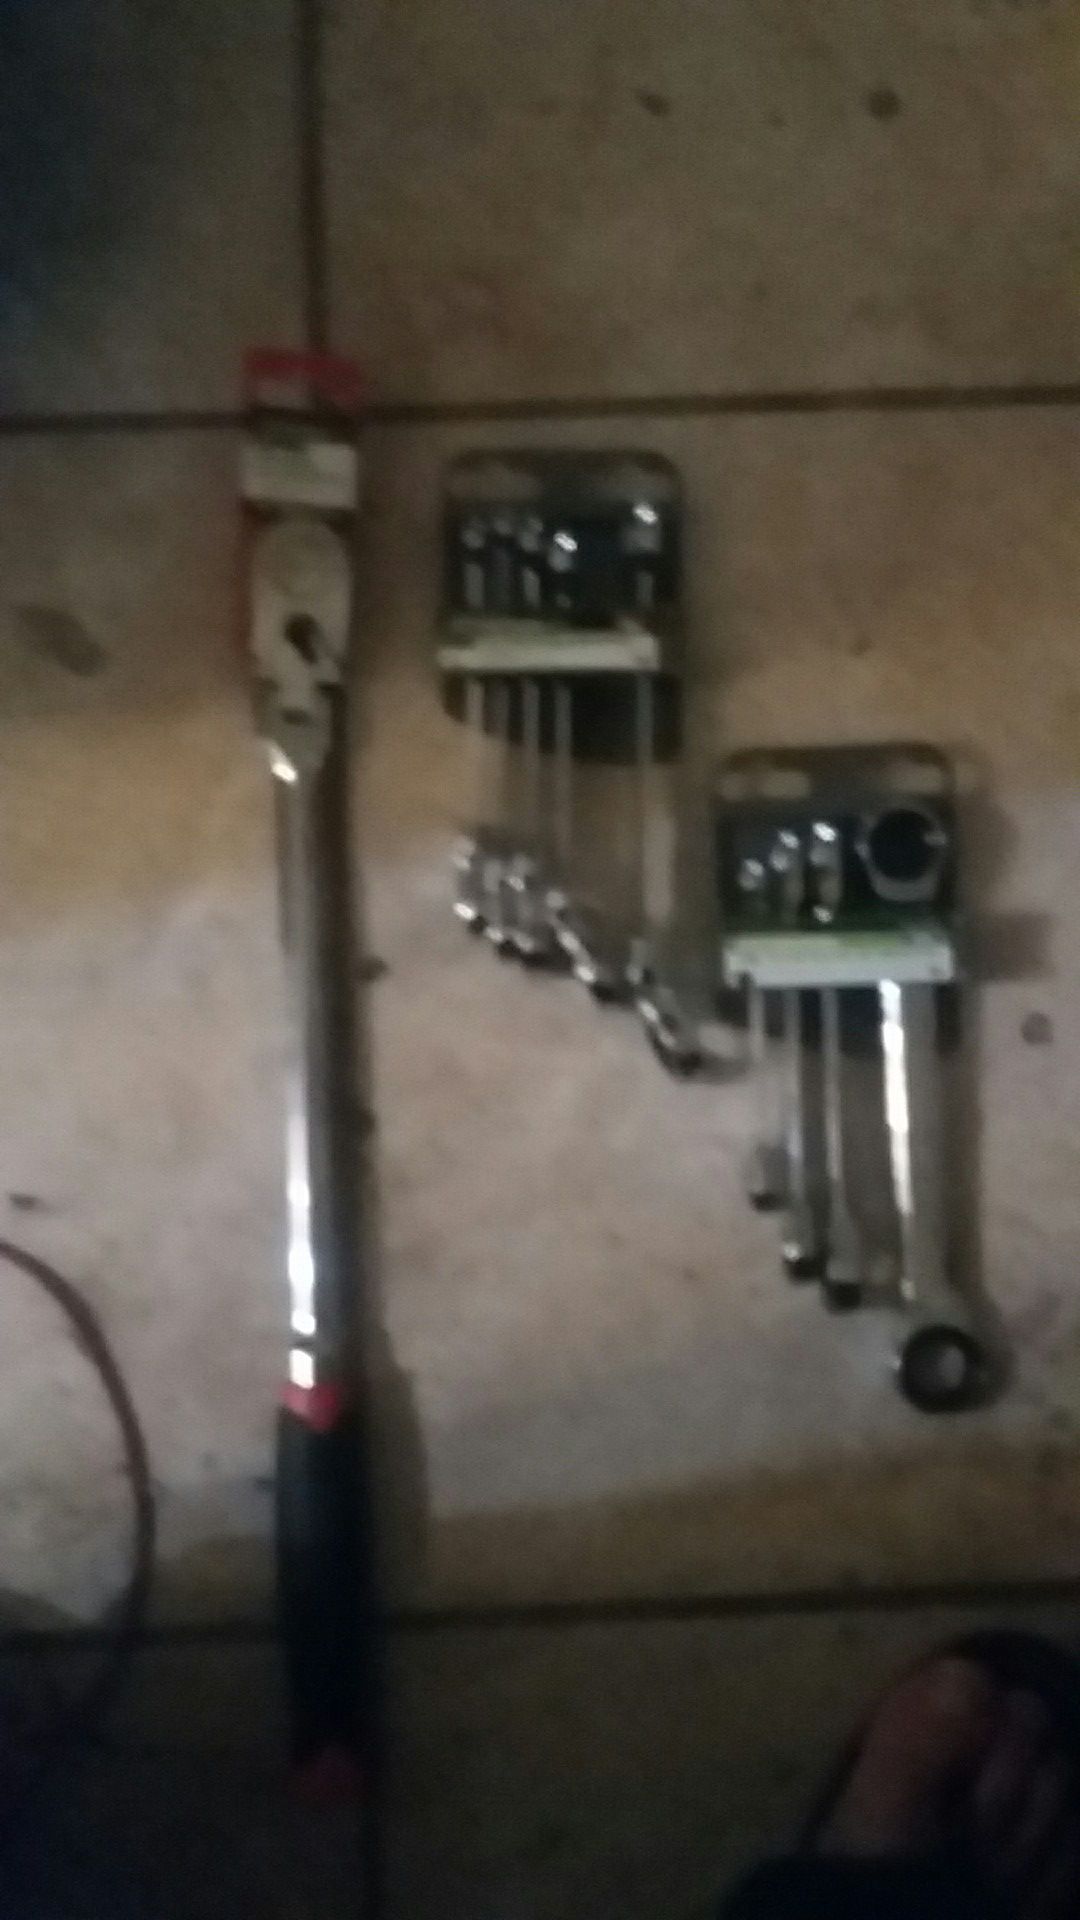 3 brand new tools (1/2 Dr long handle flex head ratchet, SAE 5 piece flex head wrenches, MM 4 piece box end wrenches )